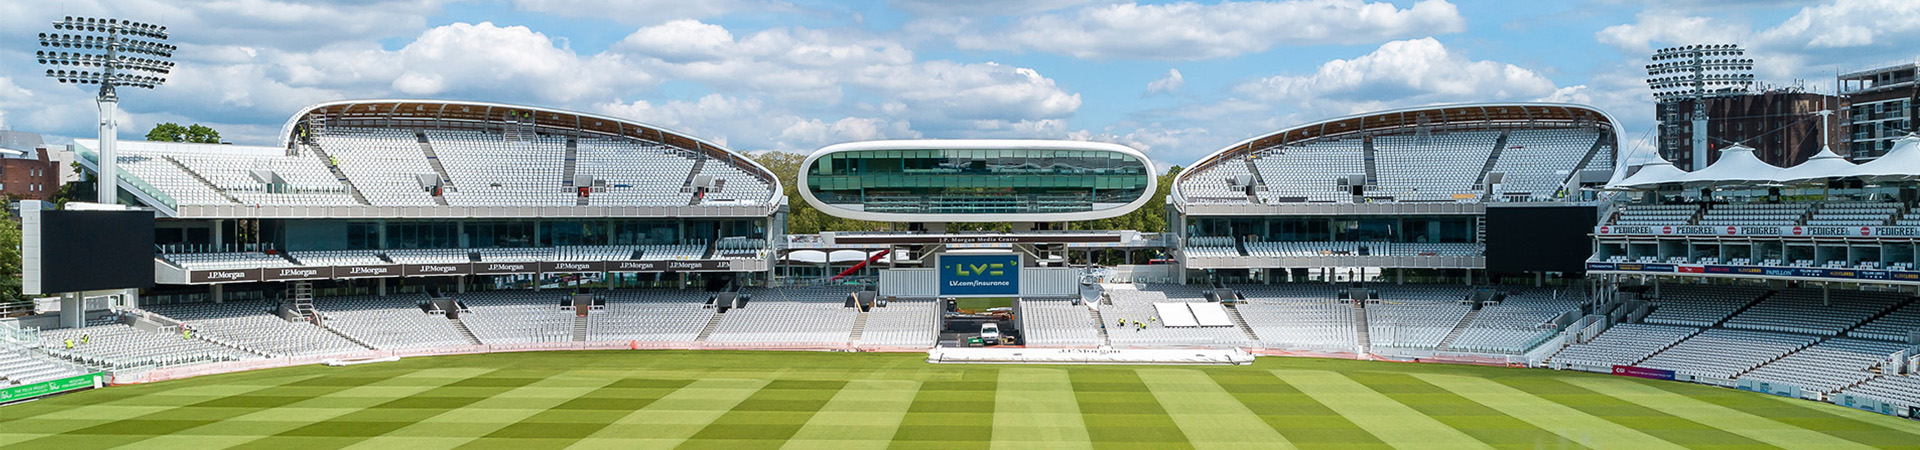 Constructional Steelwork at Lords Cricket Ground